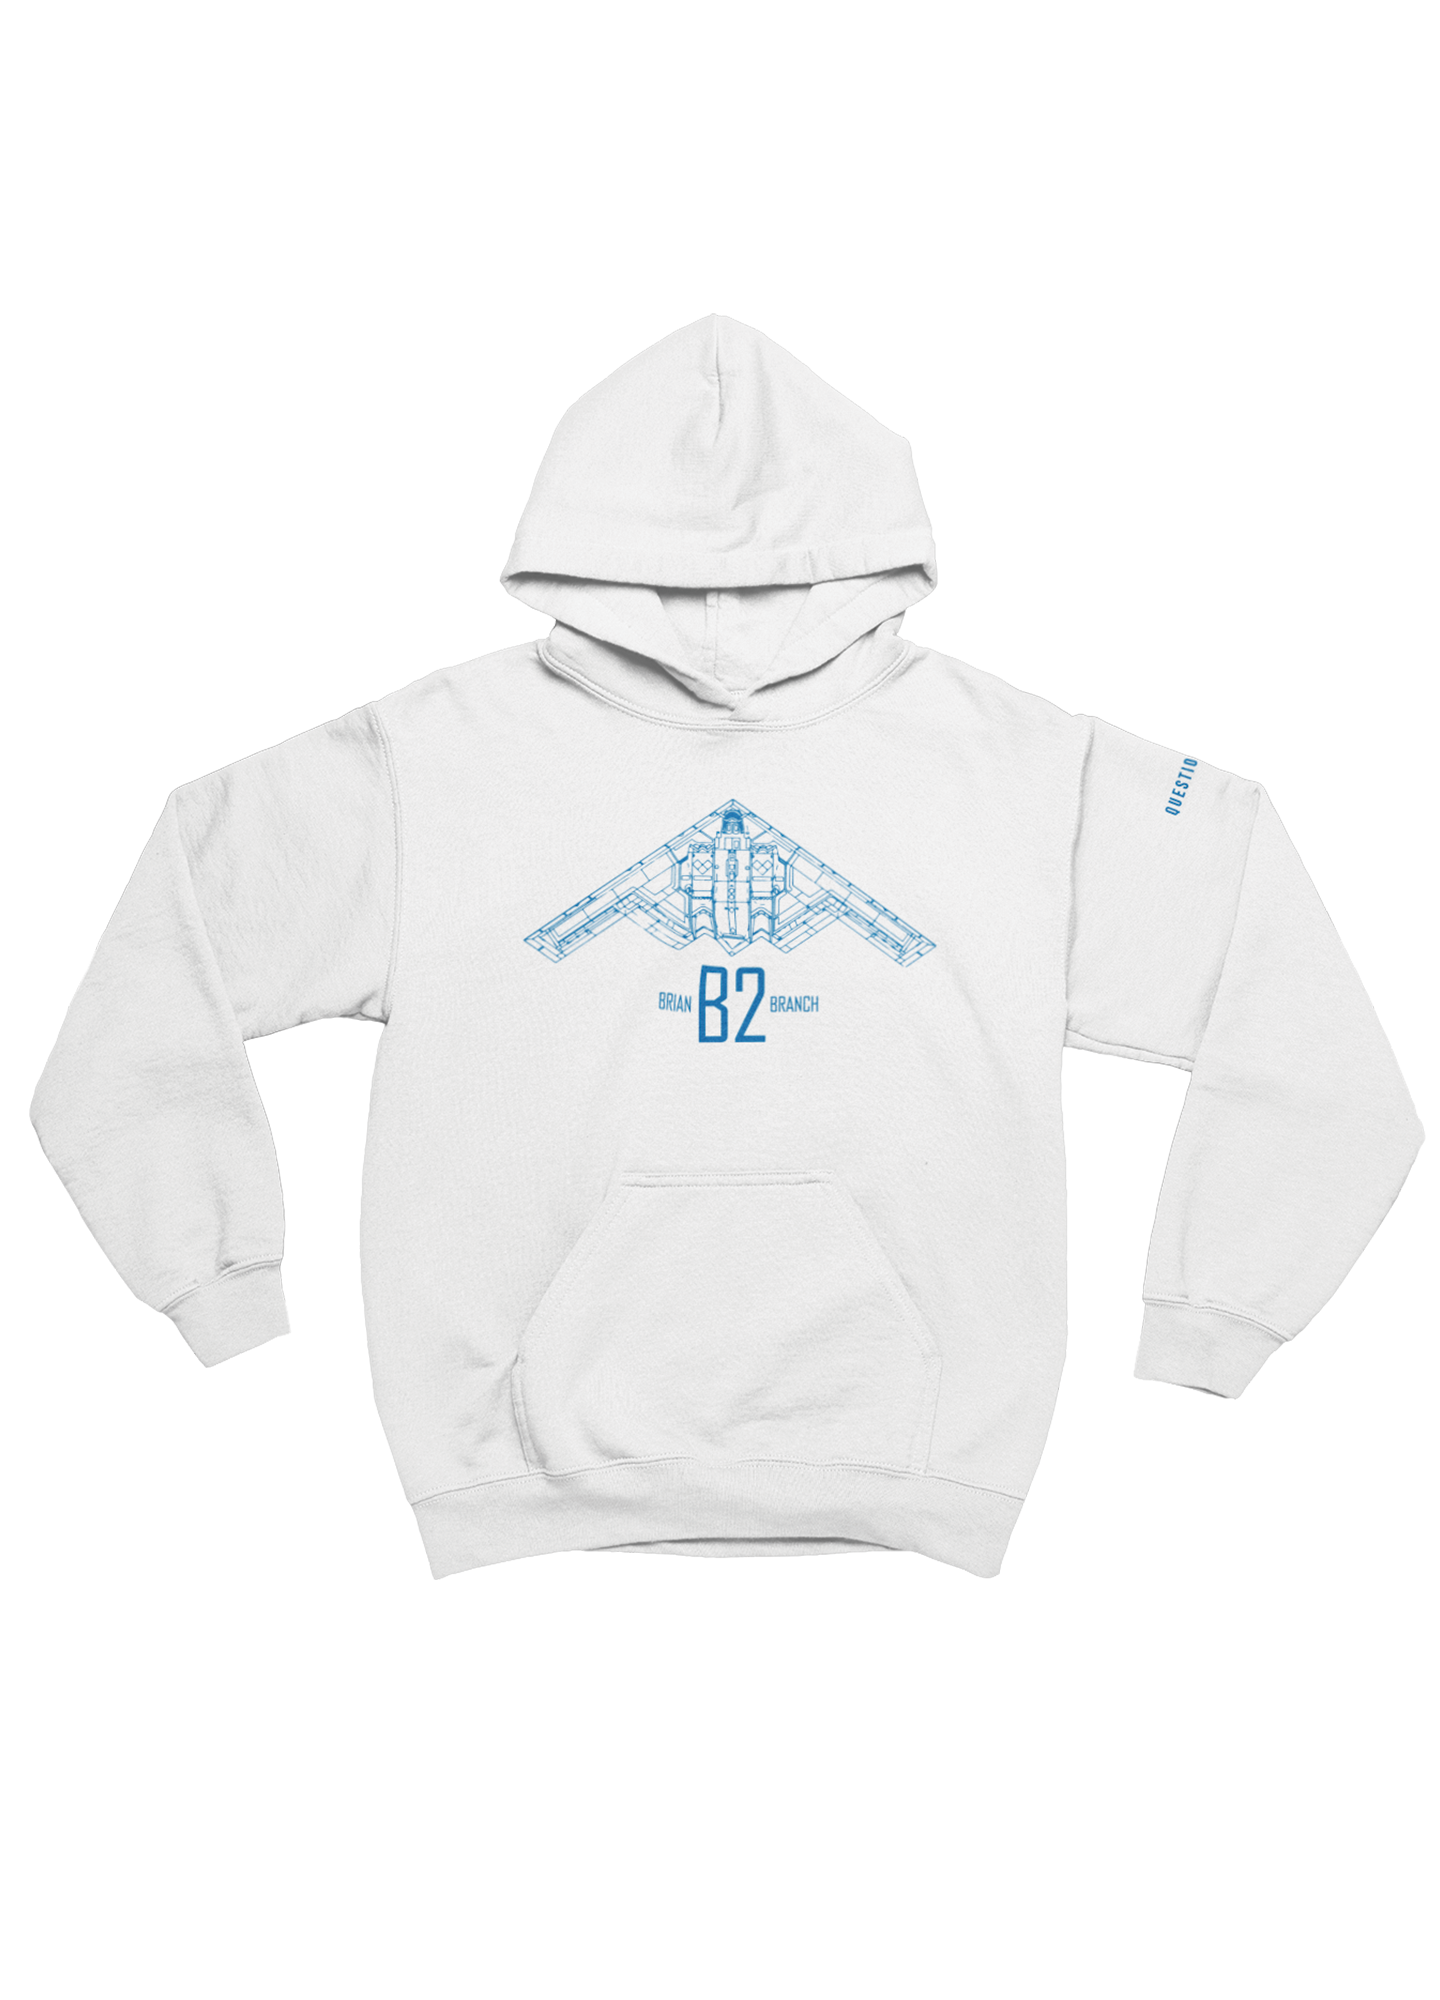 B2 Stealth Bomber Hoodie - LIMITED EDITION